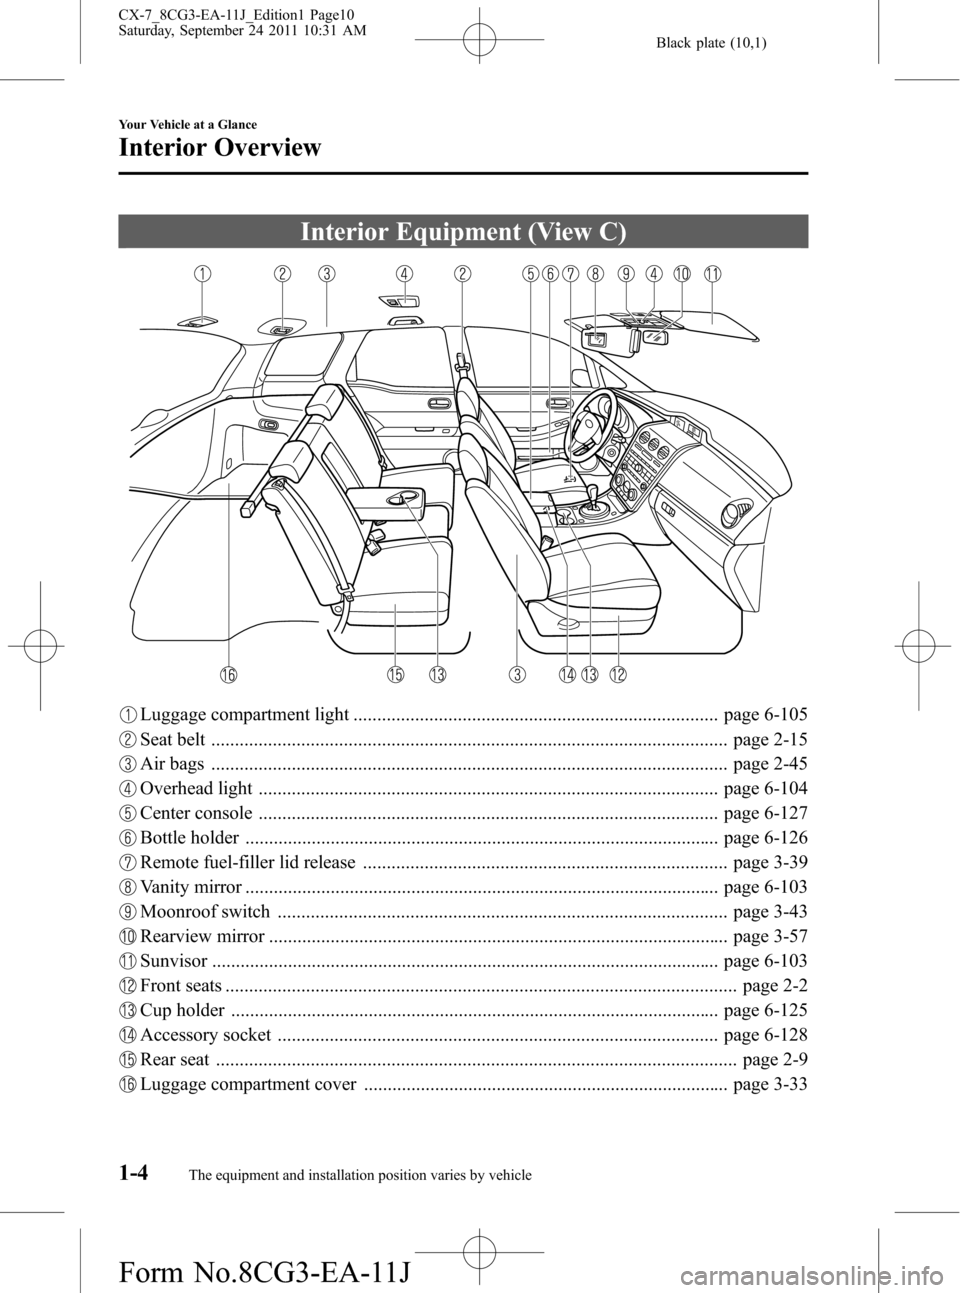 MAZDA MODEL CX-7 2012  Owners Manual (in English) Black plate (10,1)
Interior Equipment (View C)
Luggage compartment light ............................................................................. page 6-105
Seat belt ............................